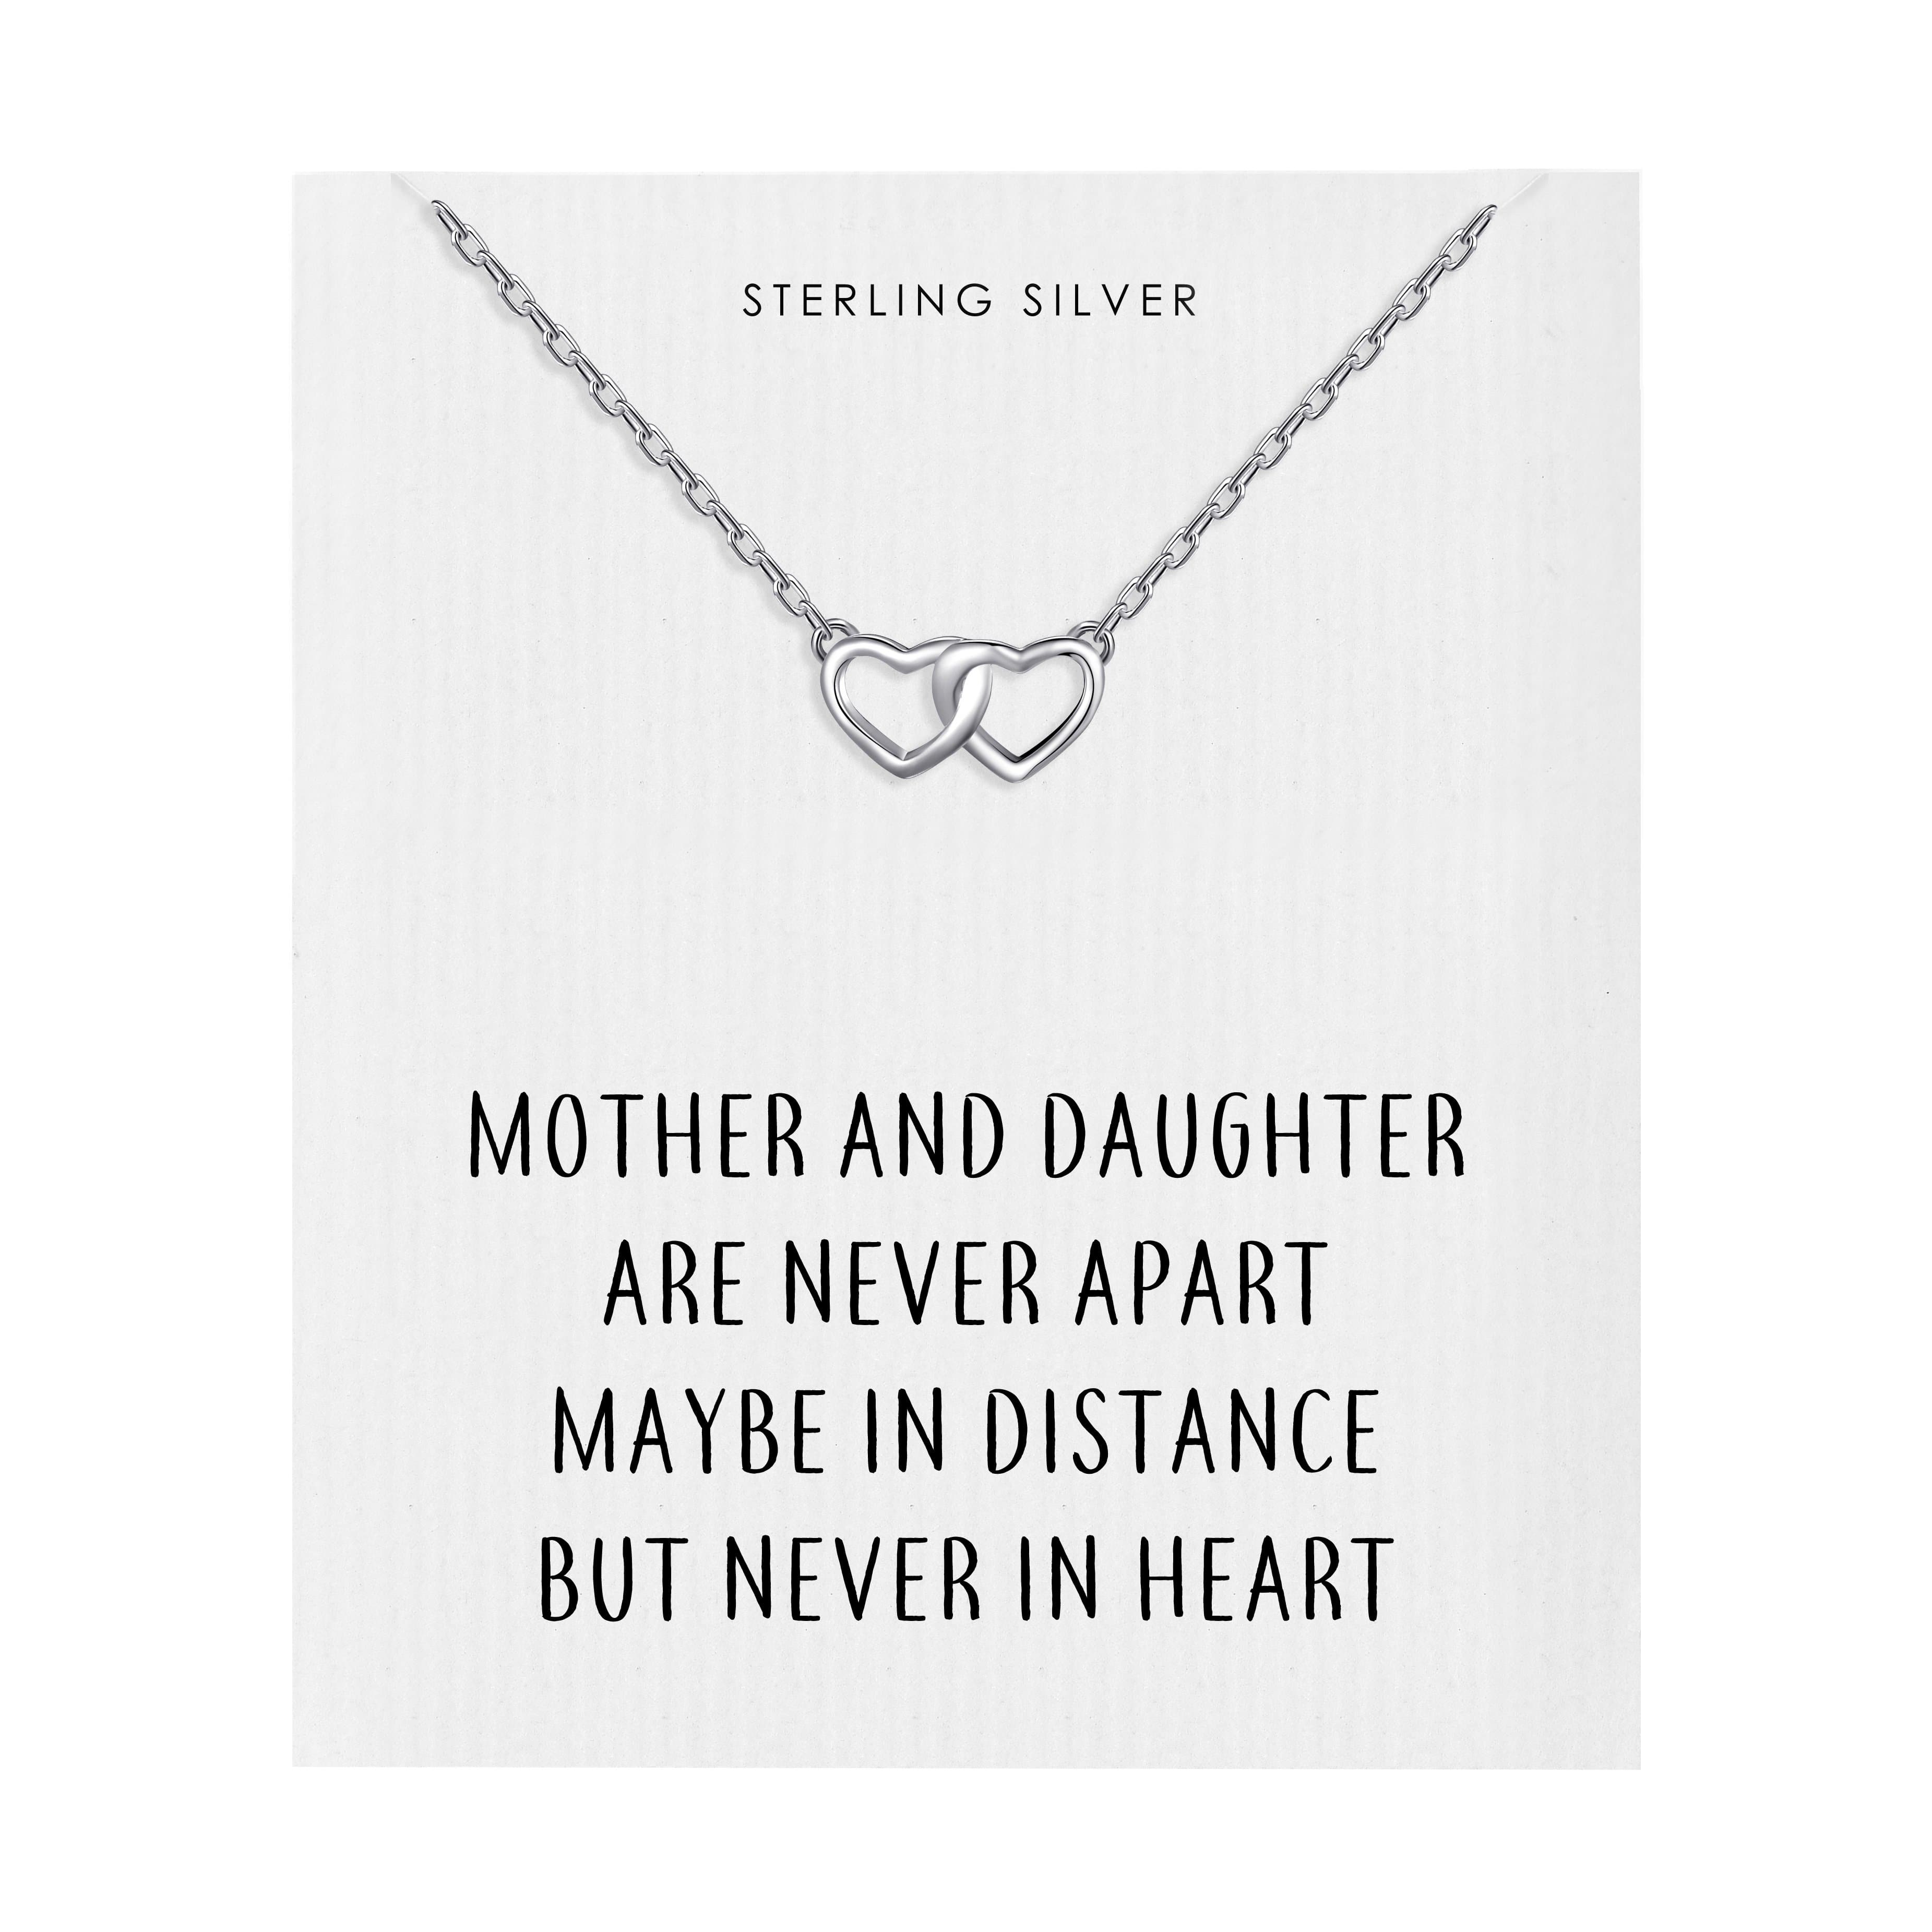 Sterling Silver Mother and Daughter Quote Heart Link Necklace by Philip Jones Jewellery